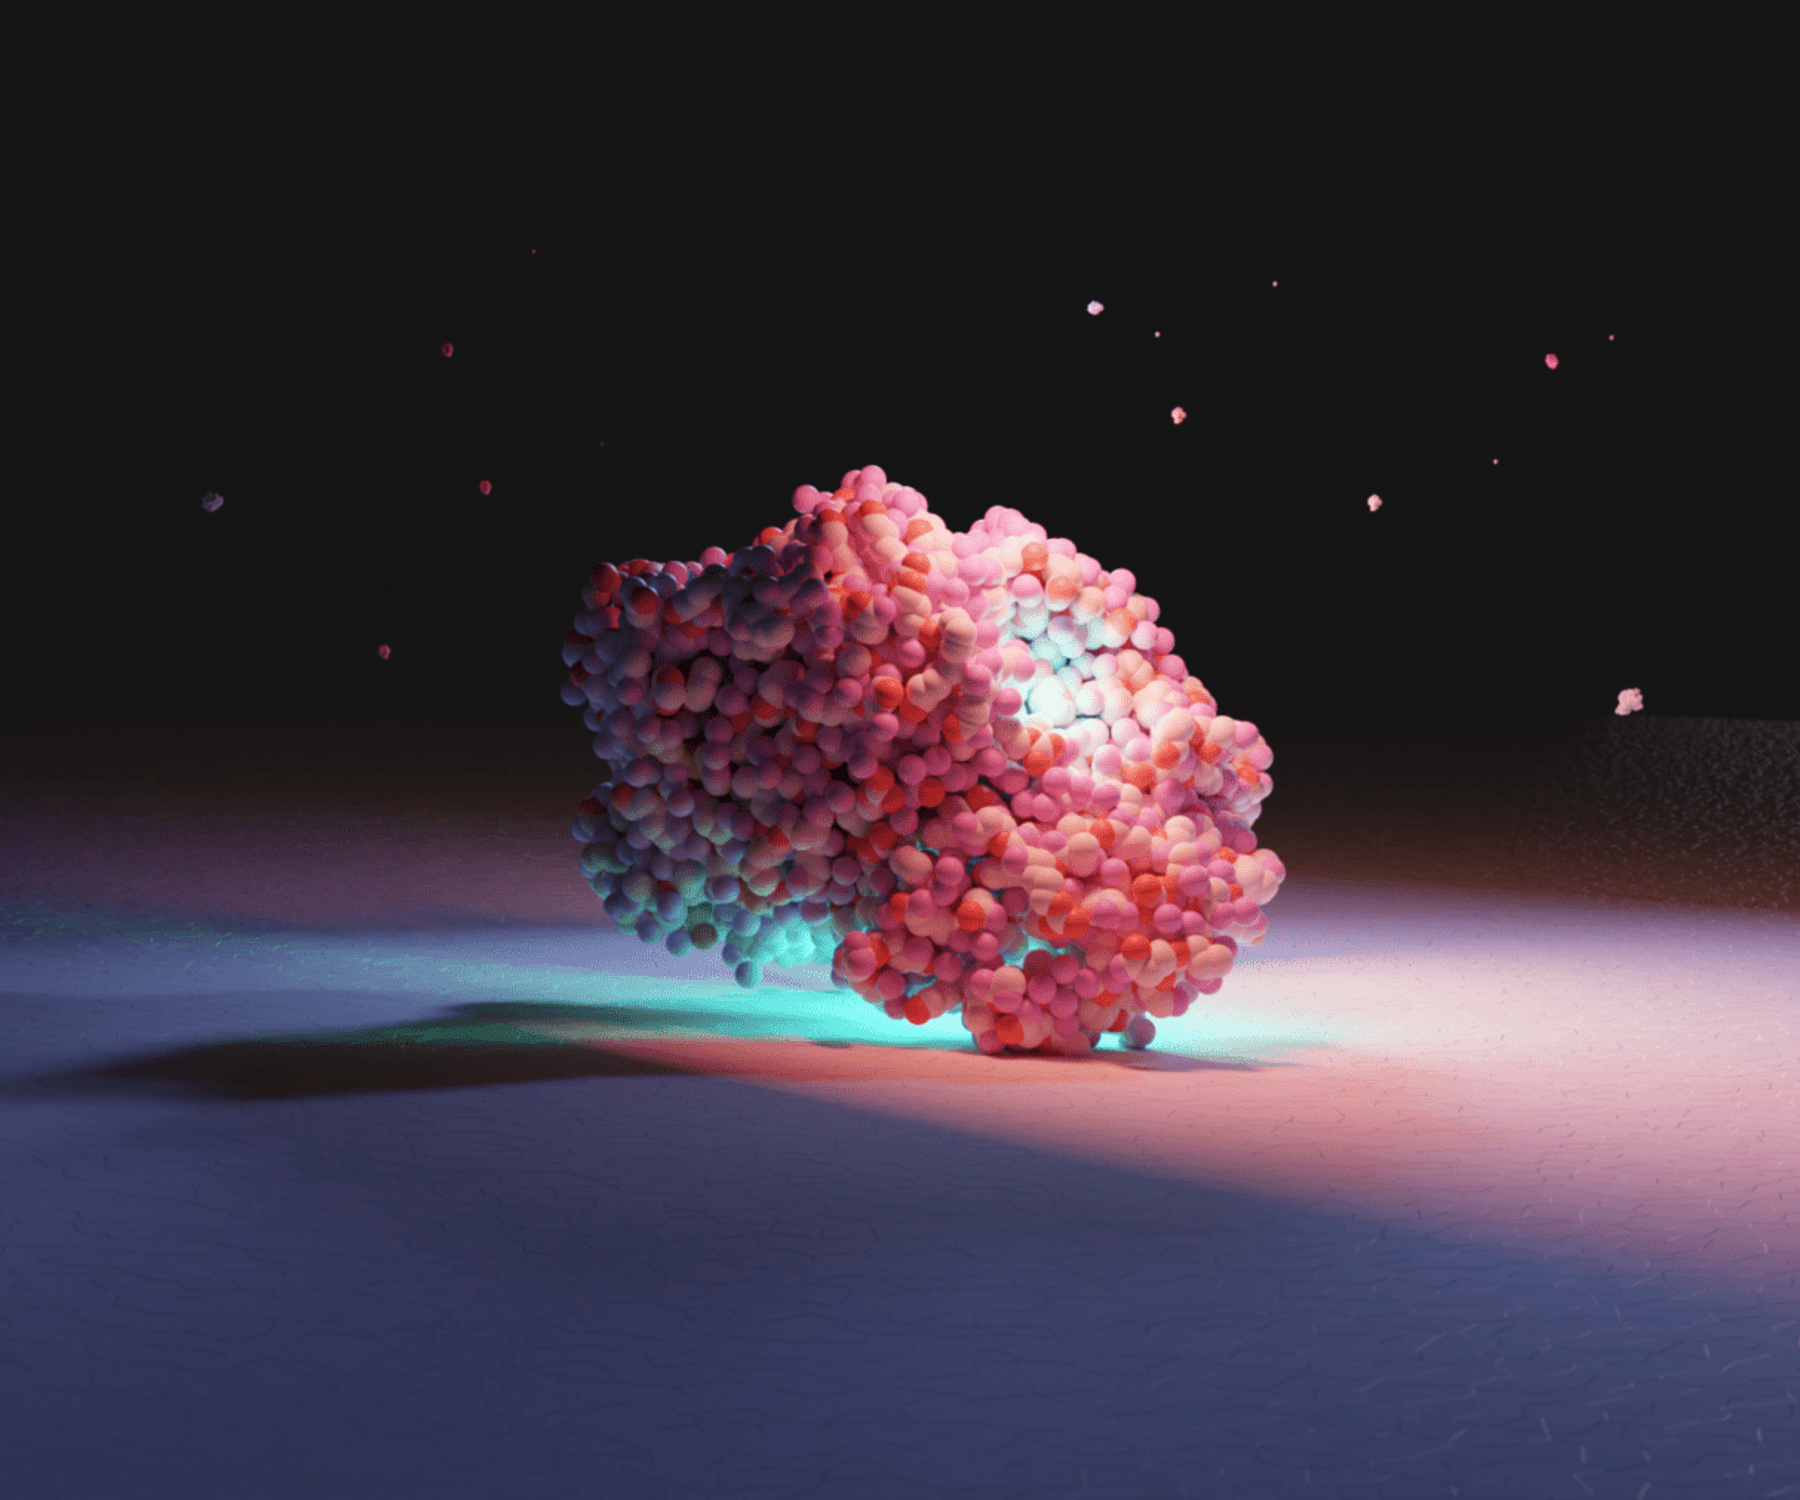 A 3D rendering of an enzyme on a dark background, its center illuminated indicating the active site